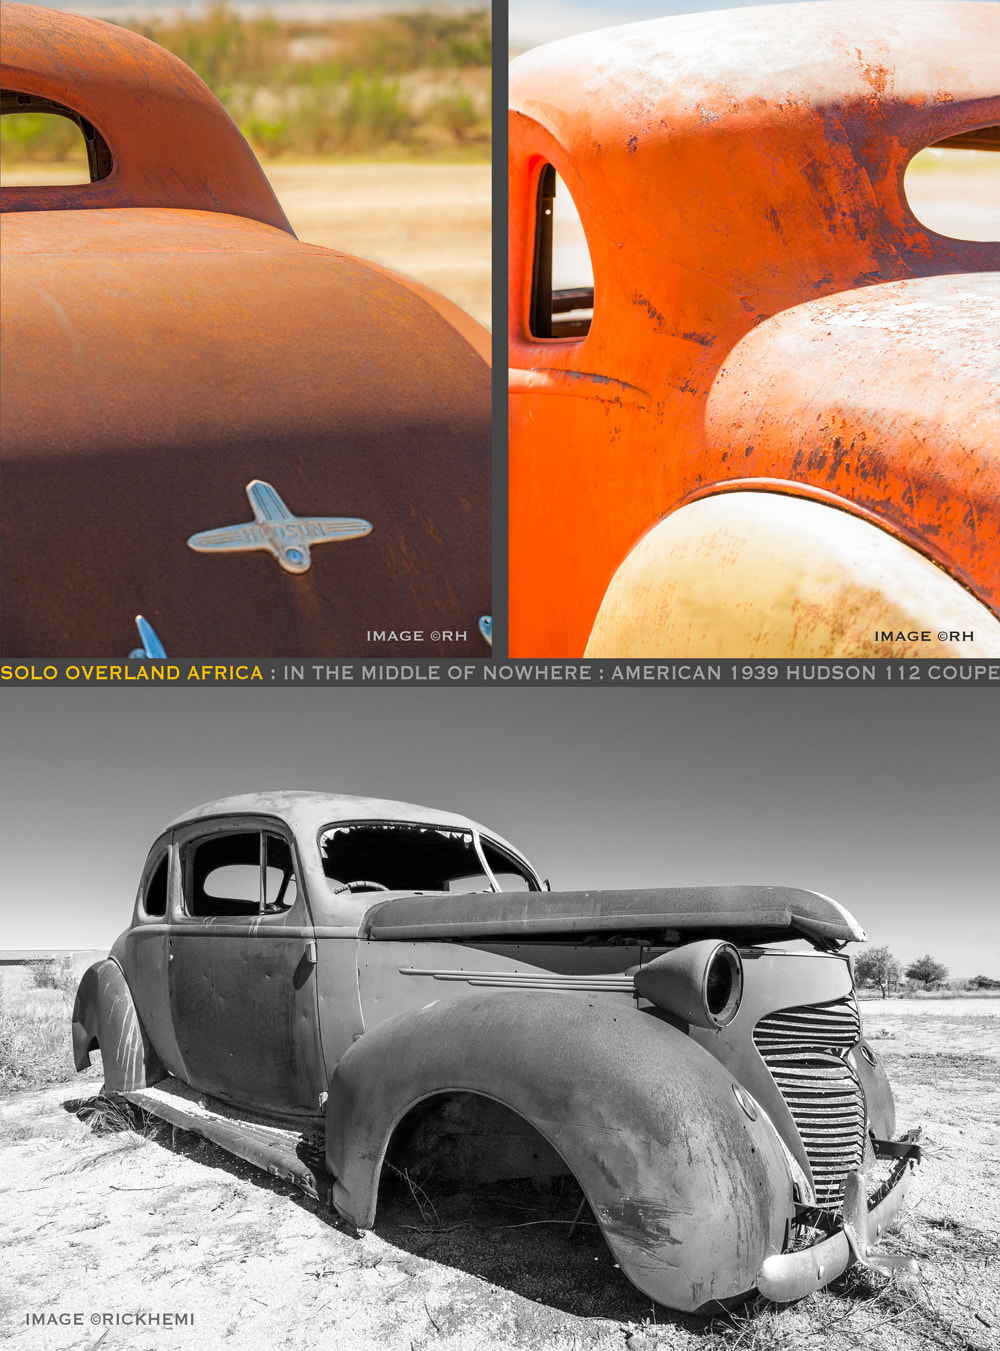 solo overland travel Africa, American 1939 Hudson 112 coupe, images by Rick Hemi